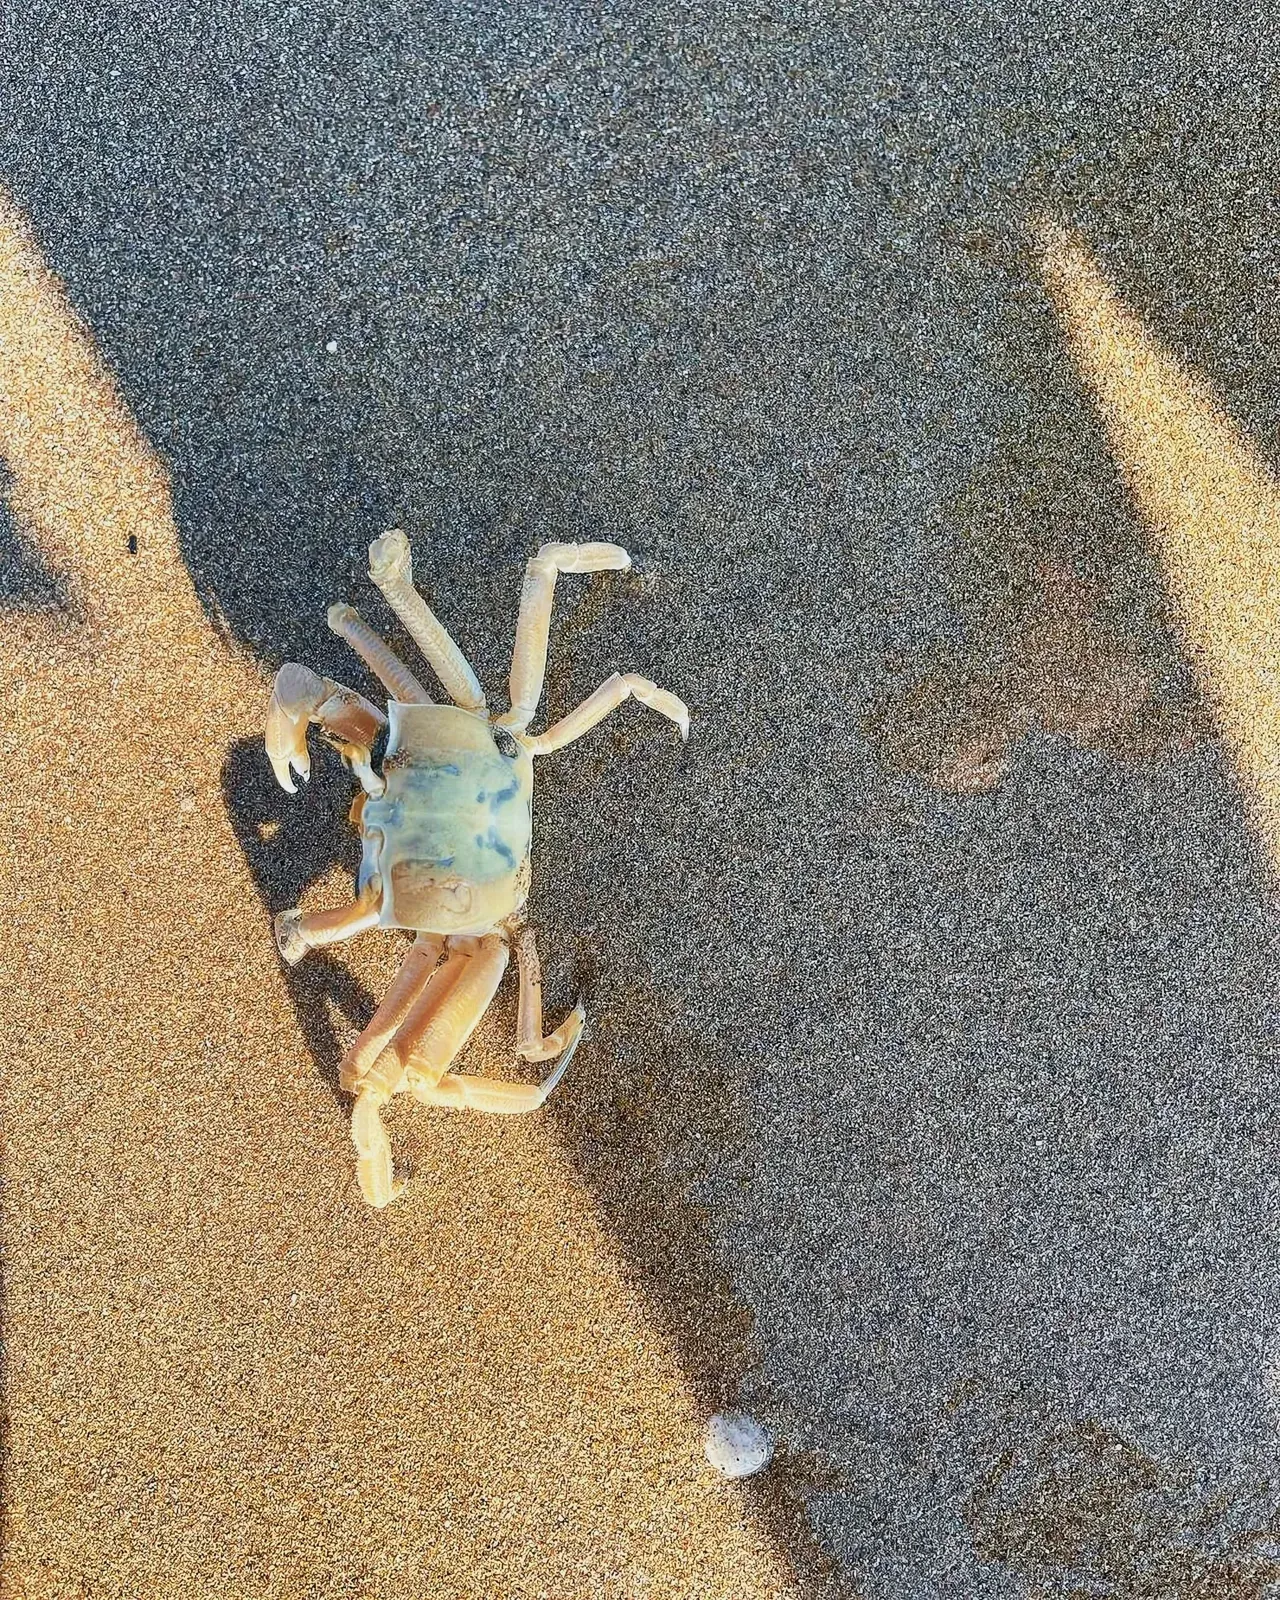 A sandy beach with a crab and an unidentified white object